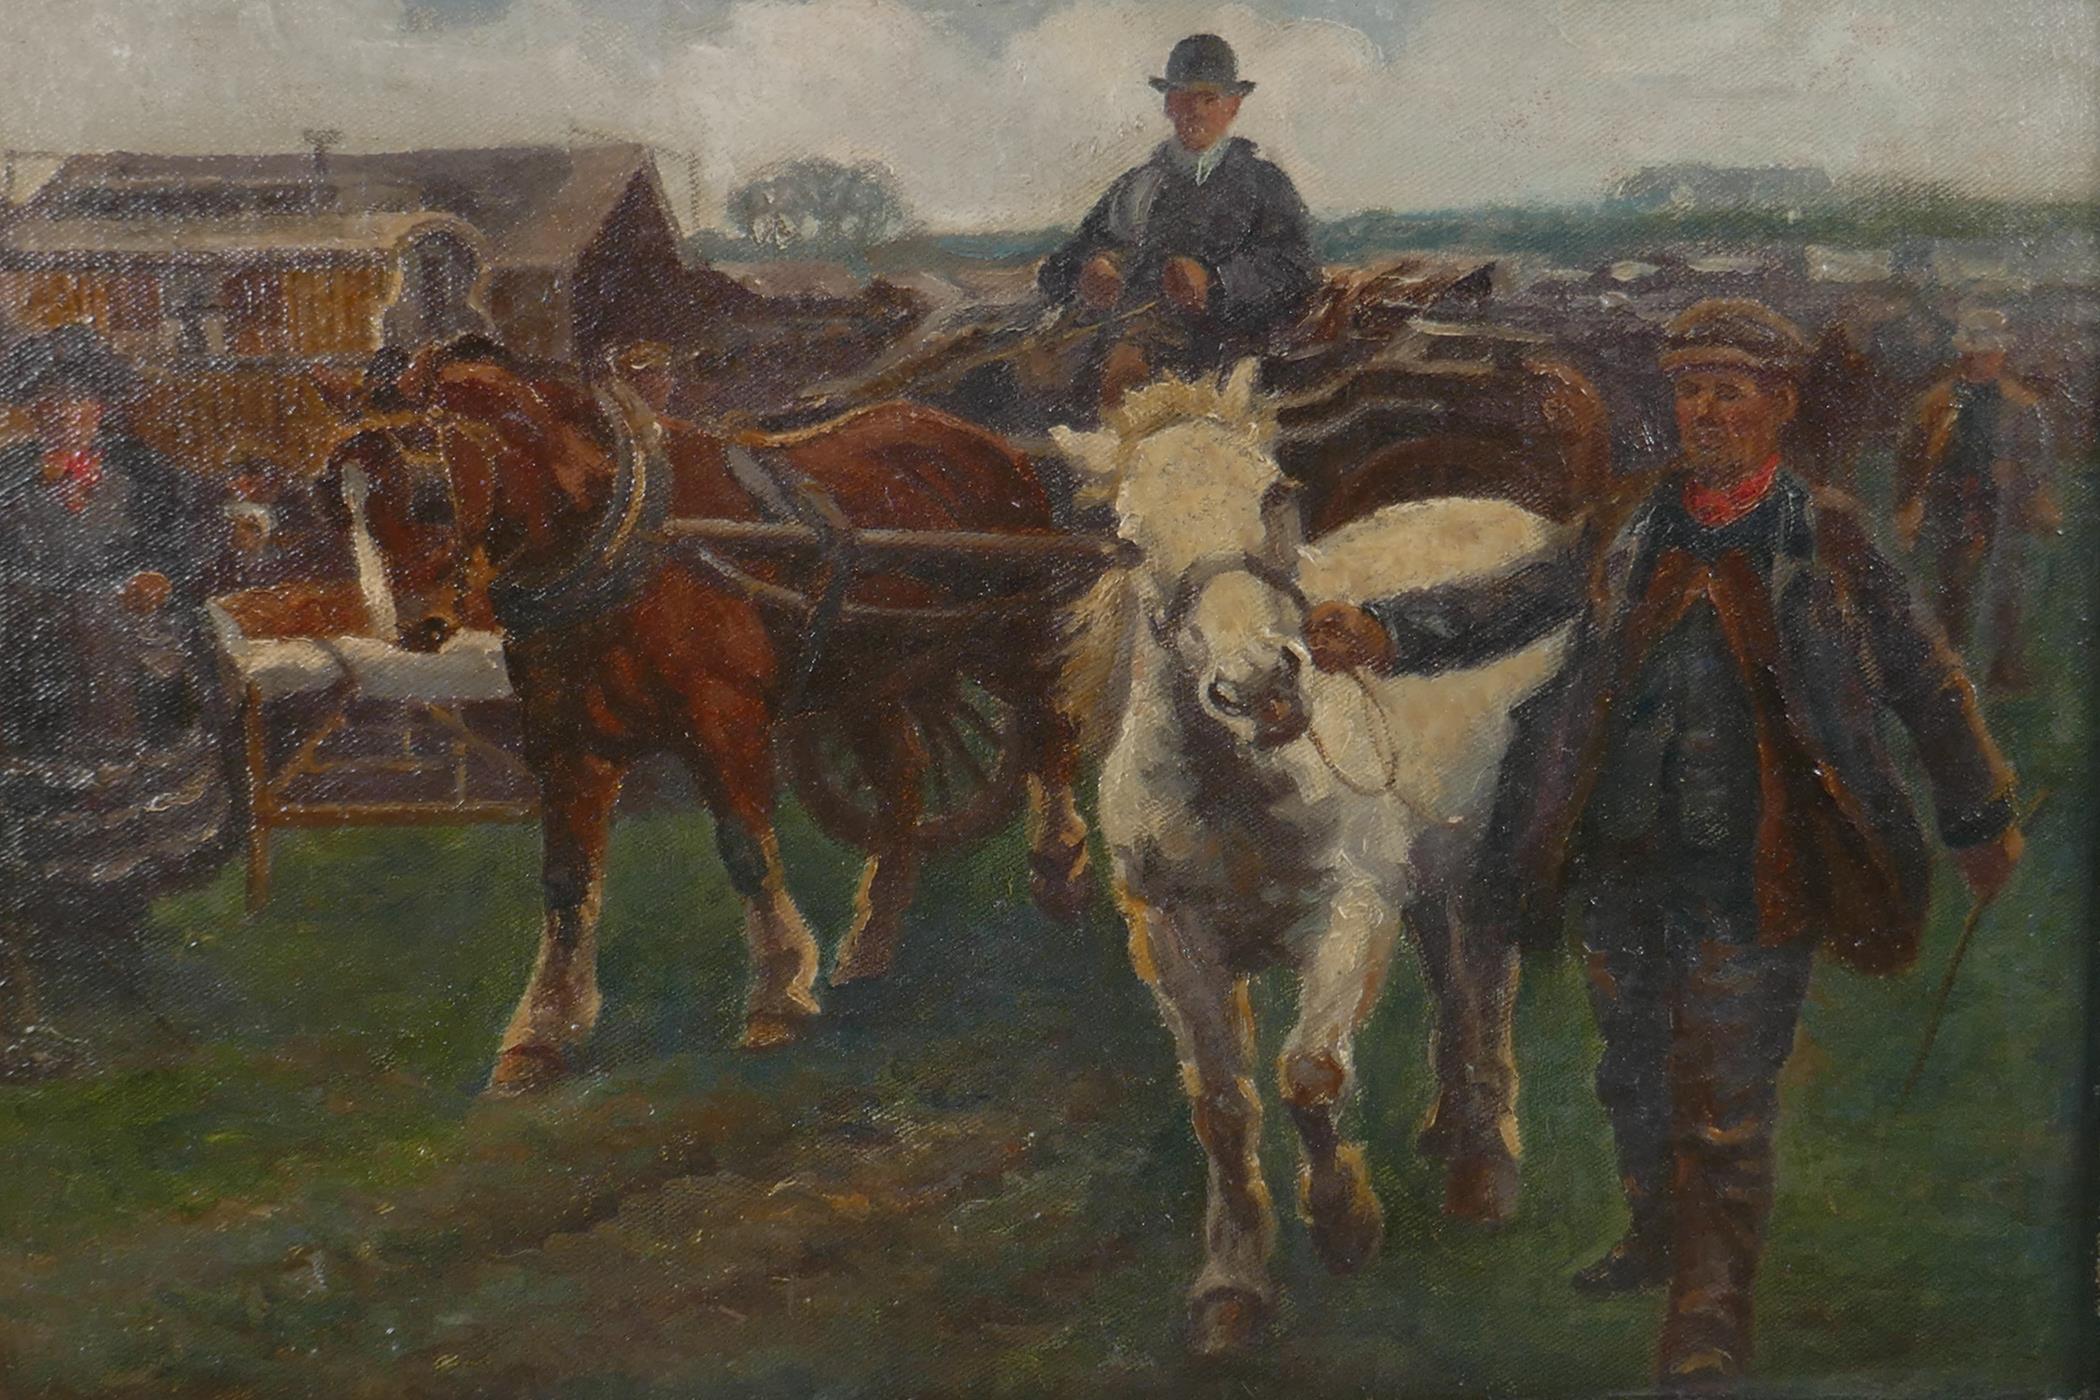 Geoffrey Mortimer (British, 1895-1986), 'The Horse Fair' after Alfred Munnings, oil on canvas laid